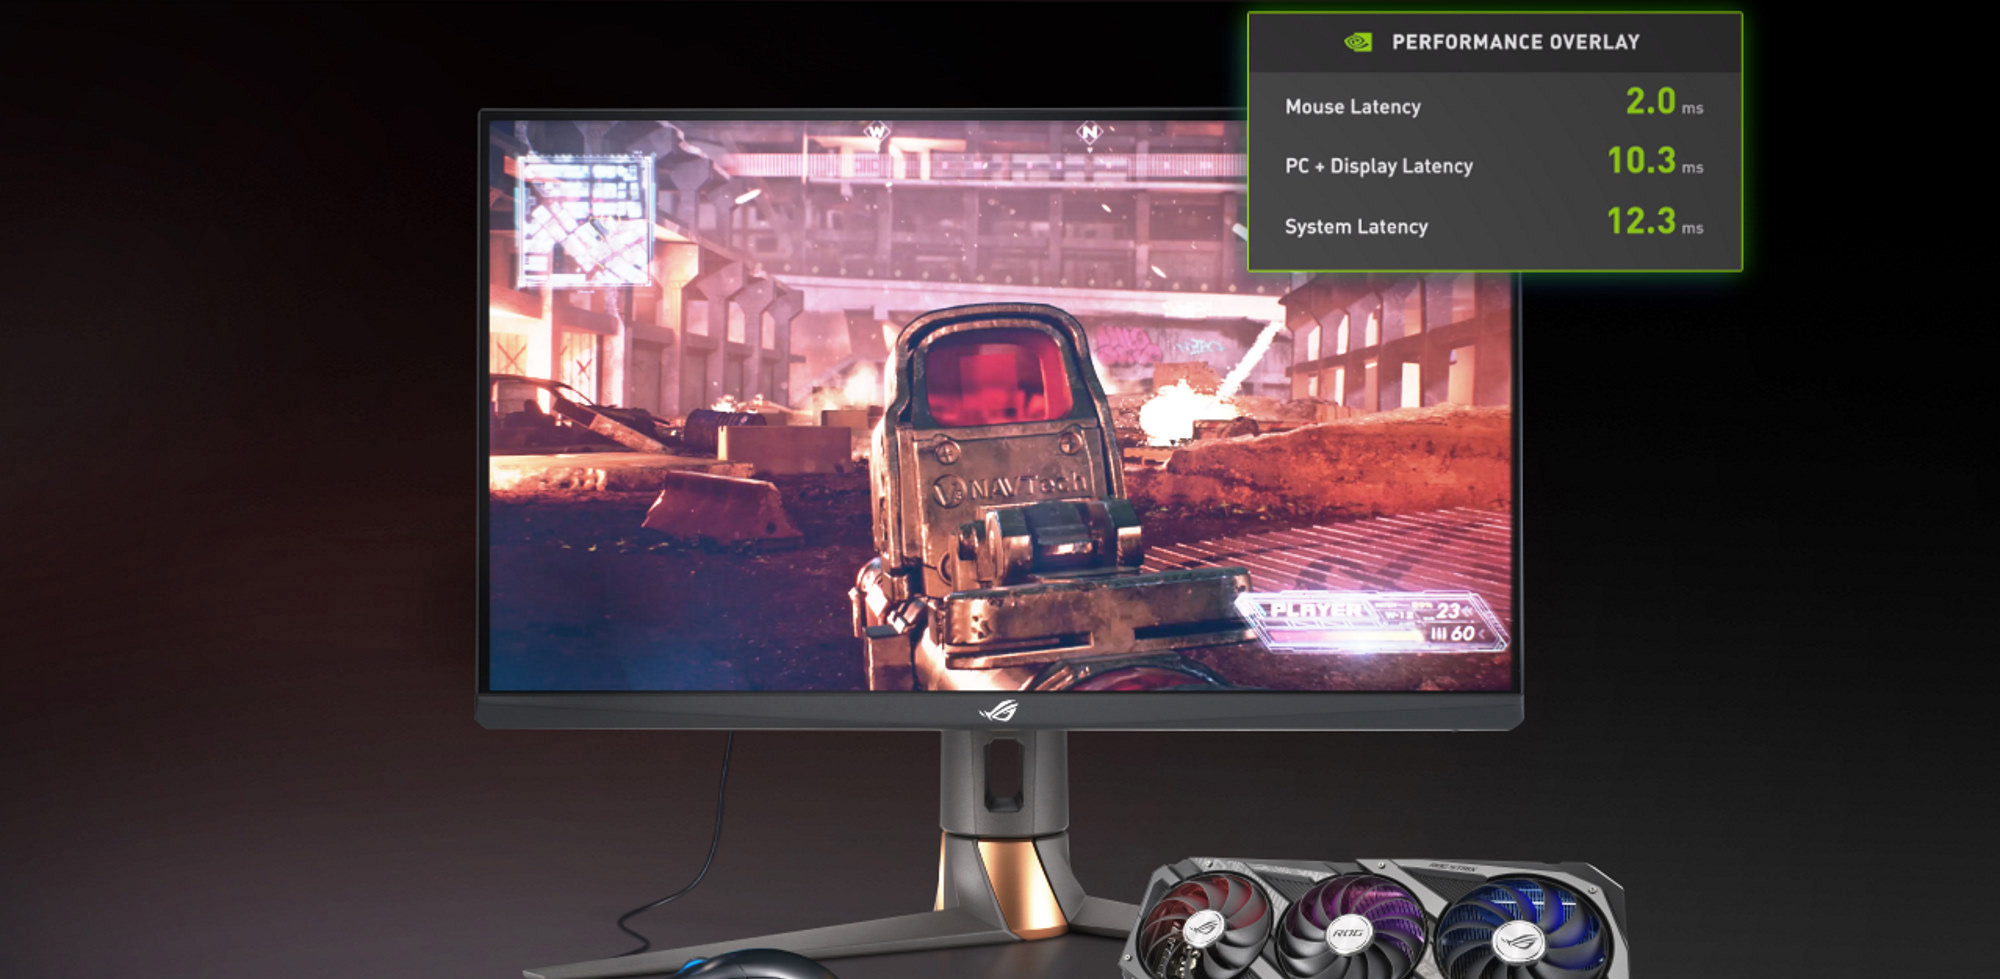 A render of an ROG gaming monitor, with an overlay showing different levels of input lag.